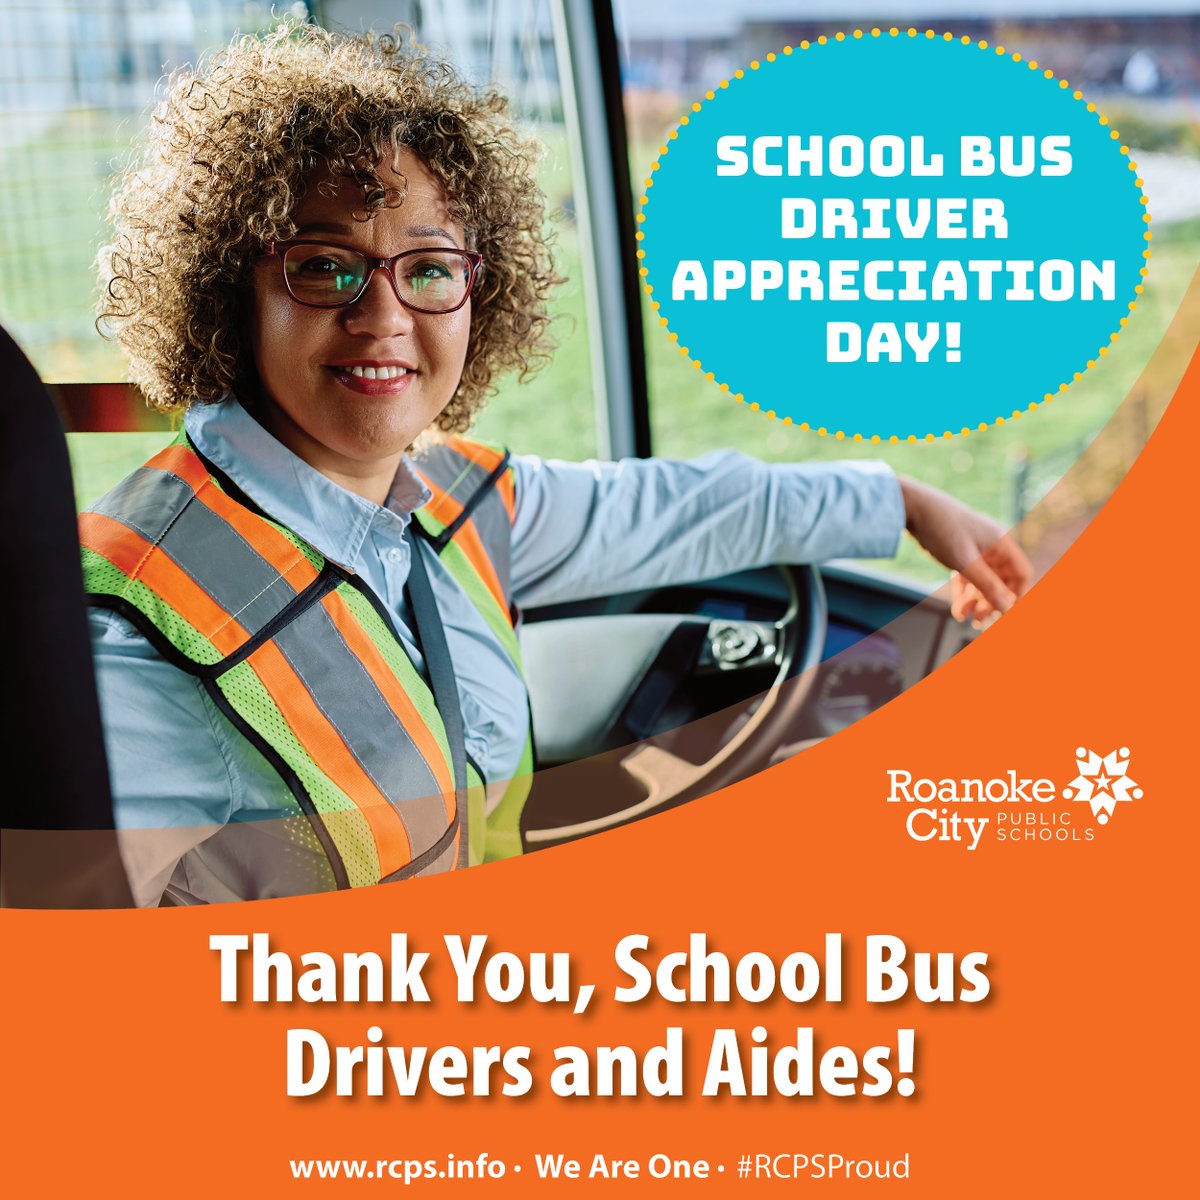 Today is Bus Driver & Aide Appreciation Day! Thank you to all our bus drivers, aides, and other transportation employees who go above and beyond to ensure students are transported safely to and from school every day! We truly appreciate all you do! #RCPSProud #WeAreOne